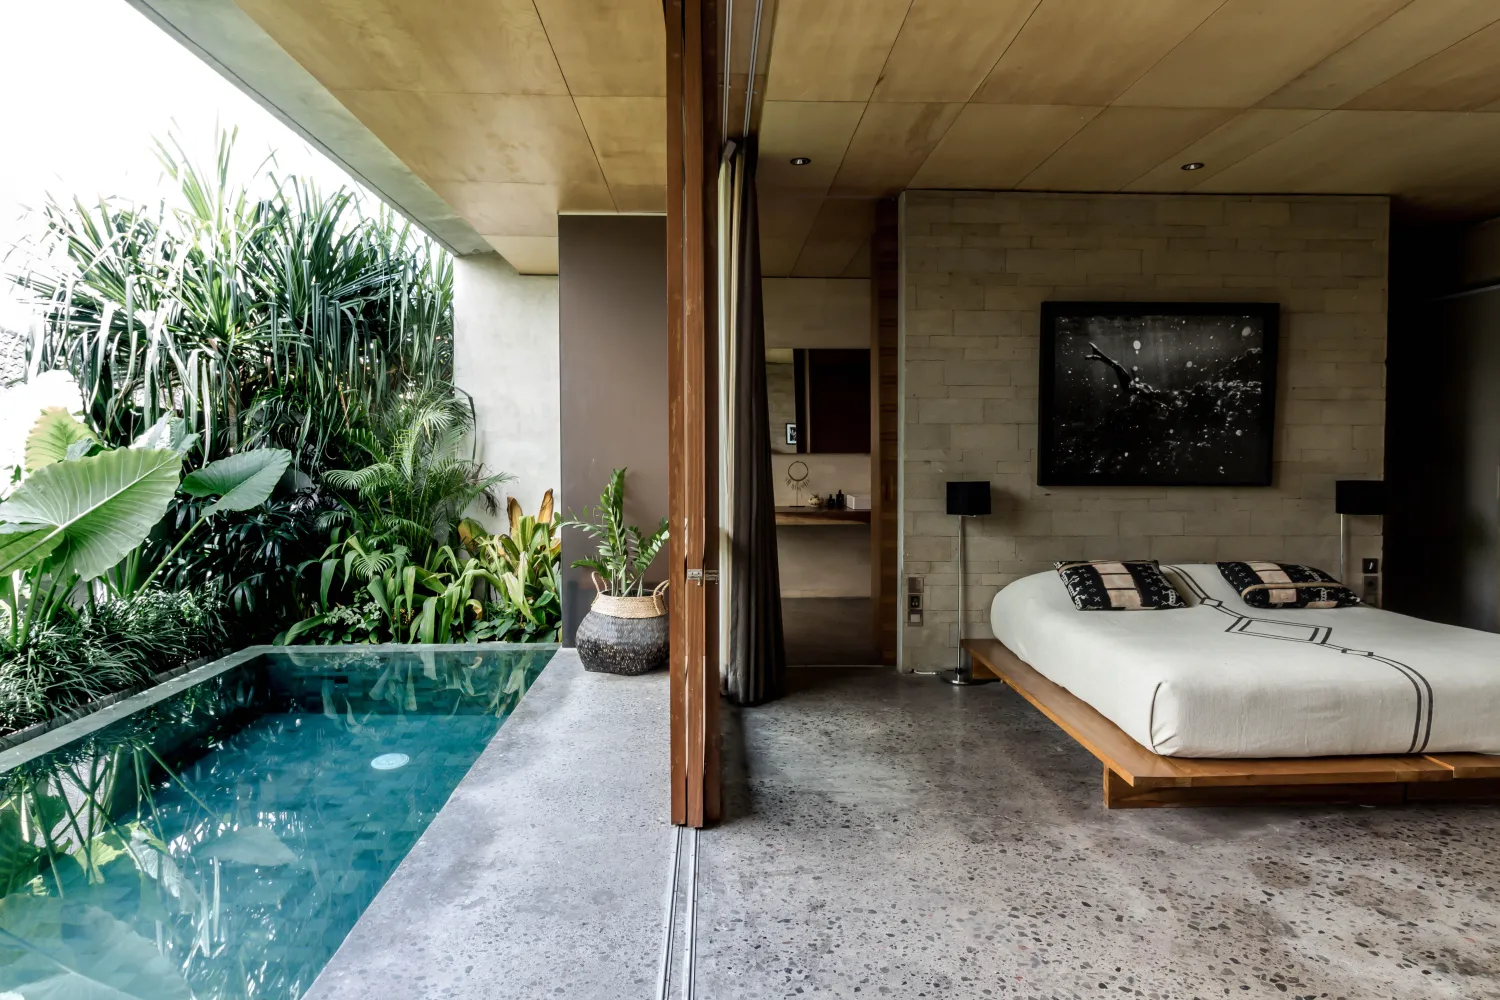 Interior of a suite with pool at The Slow hotel in Canggu, Bali.